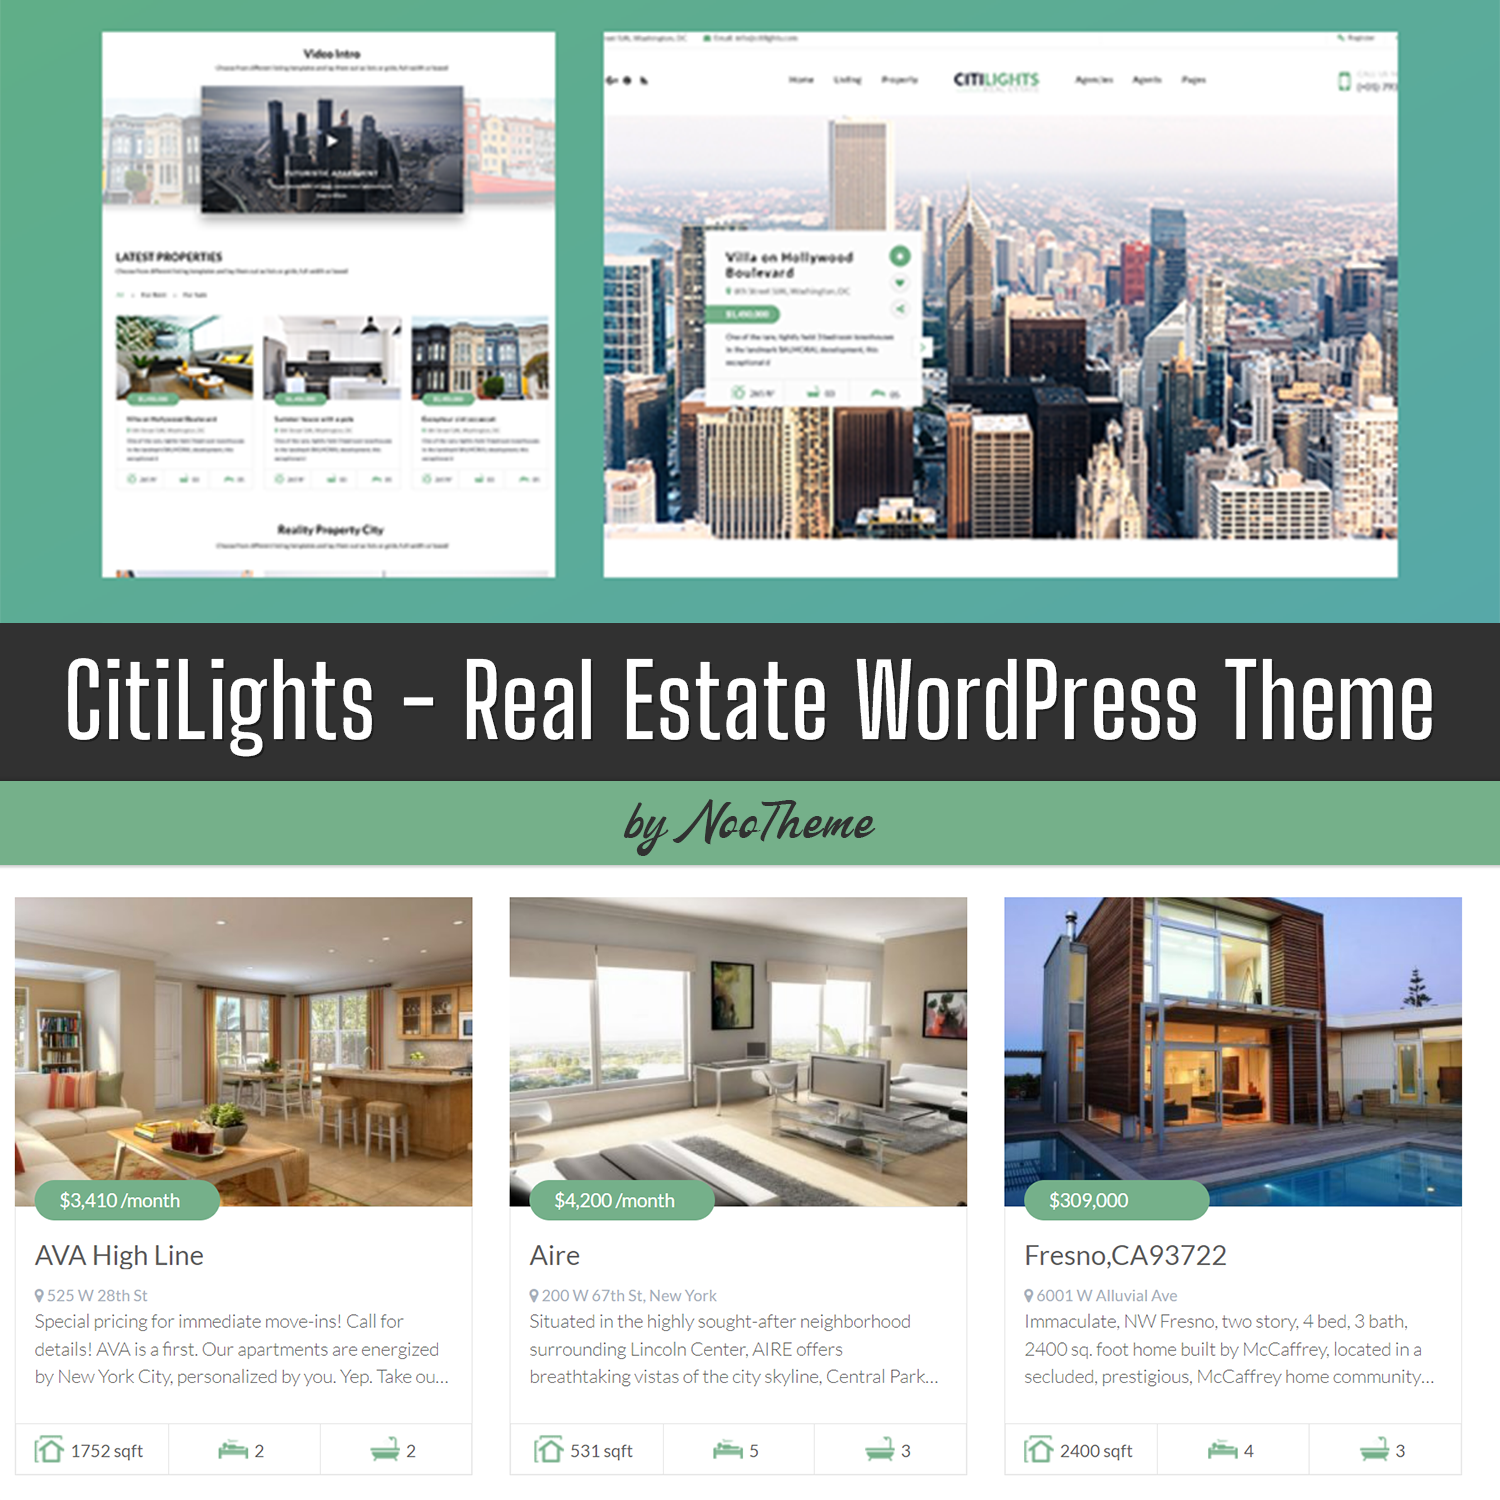 Preview citilights real estate wordpress theme.